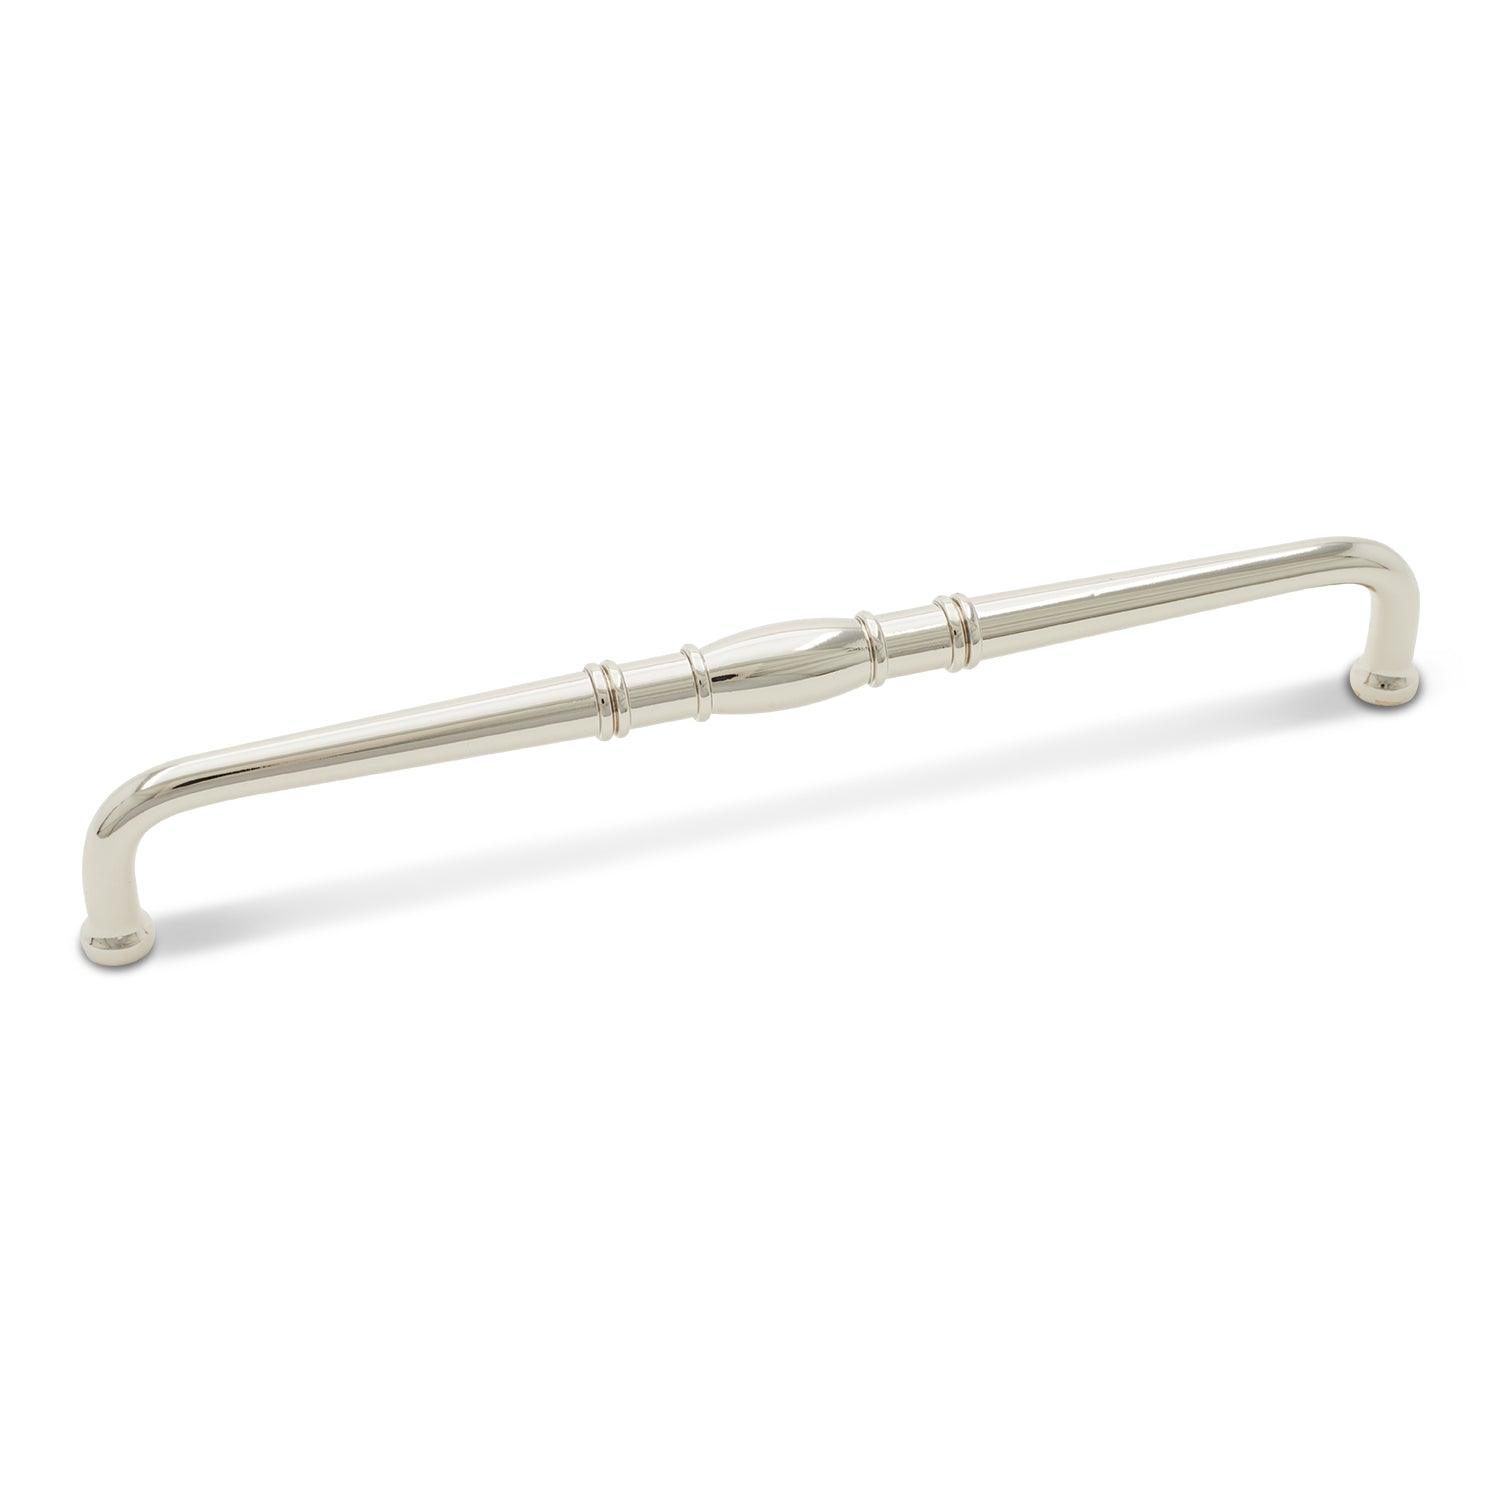 RKI - Barrel Middle Collection - Cabinet Pull - APex Hardware NY 